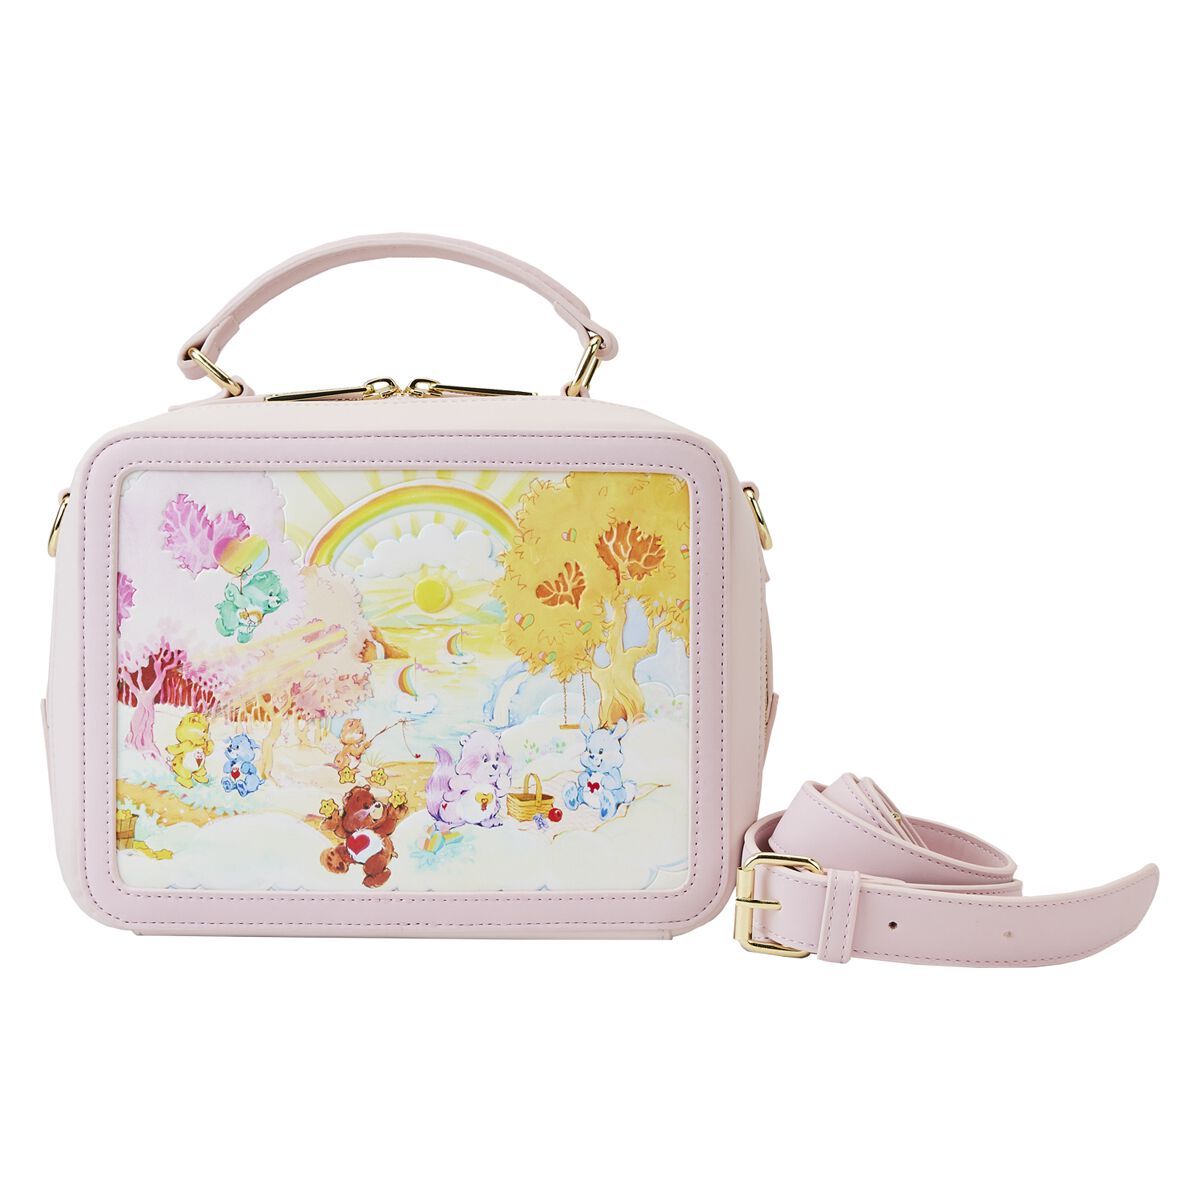 Loungefly x Care Bears and Cousins Lunchbox Crossbody Bag